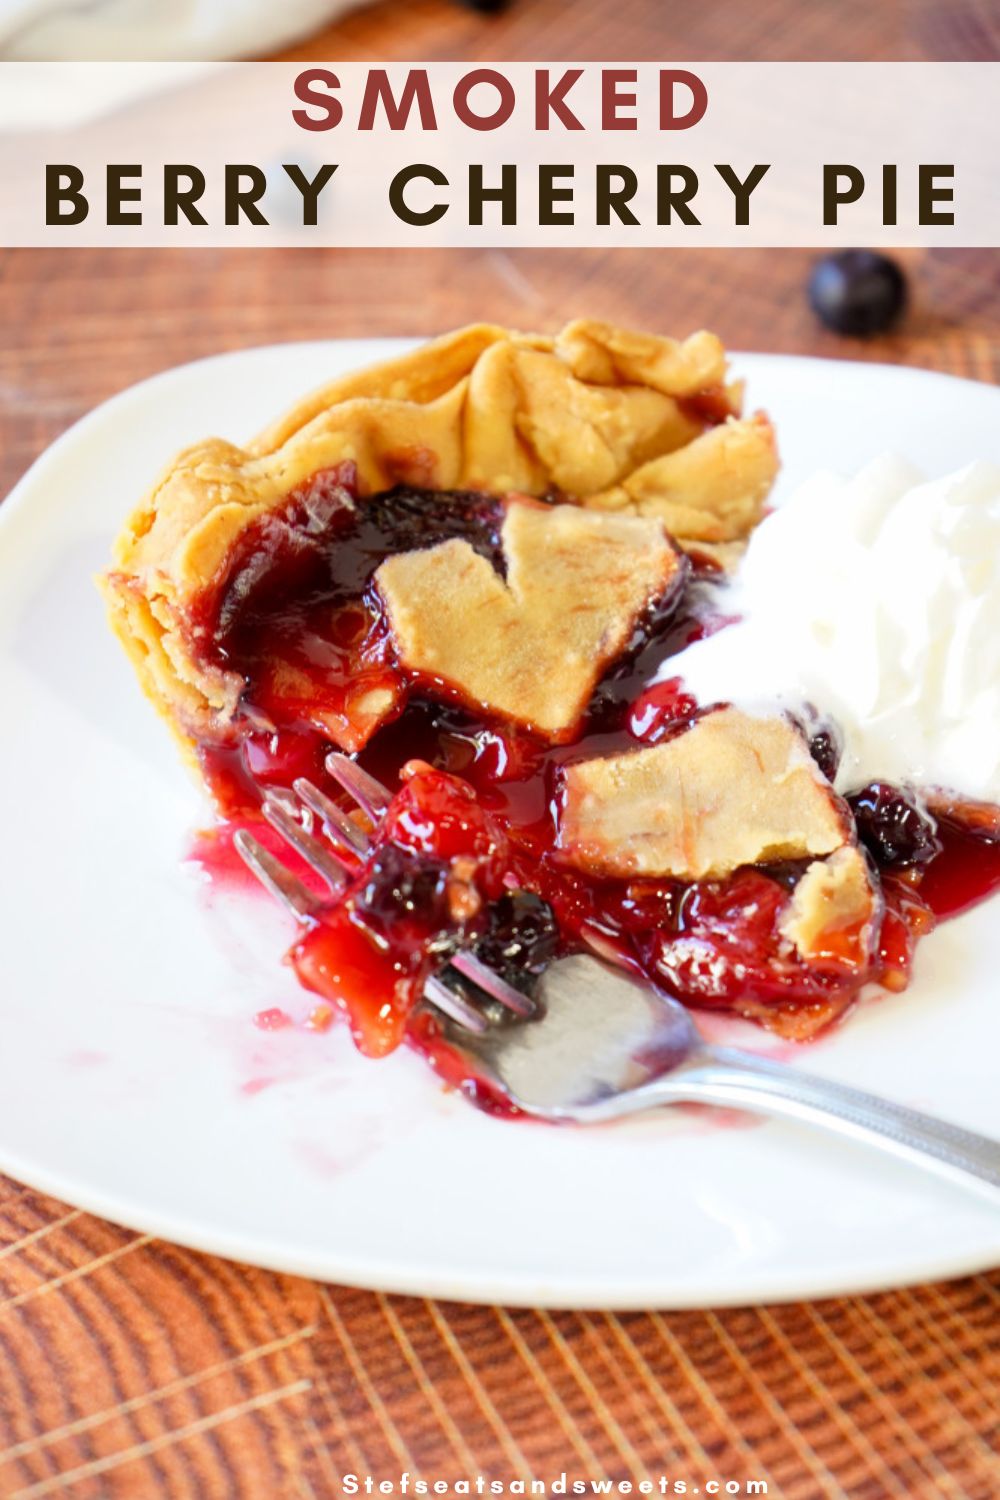 How to make a smoked cherry pie 